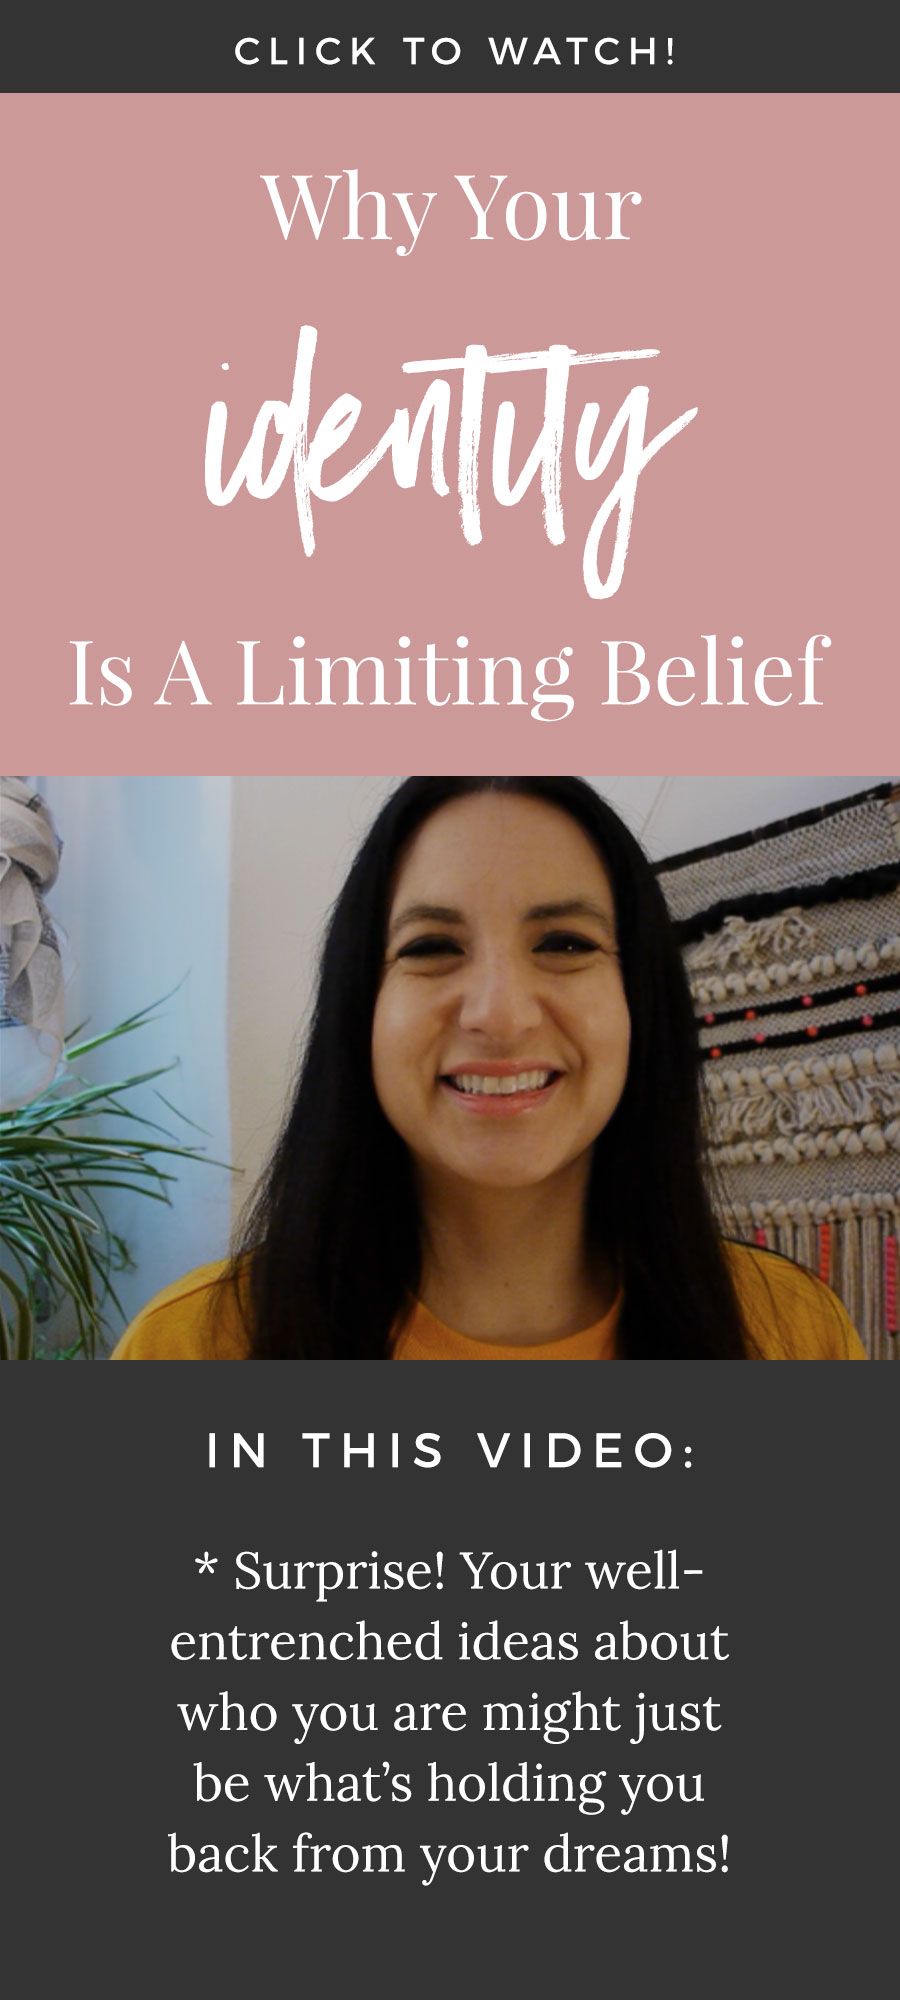 Why Your Identity Is A Limiting Belief